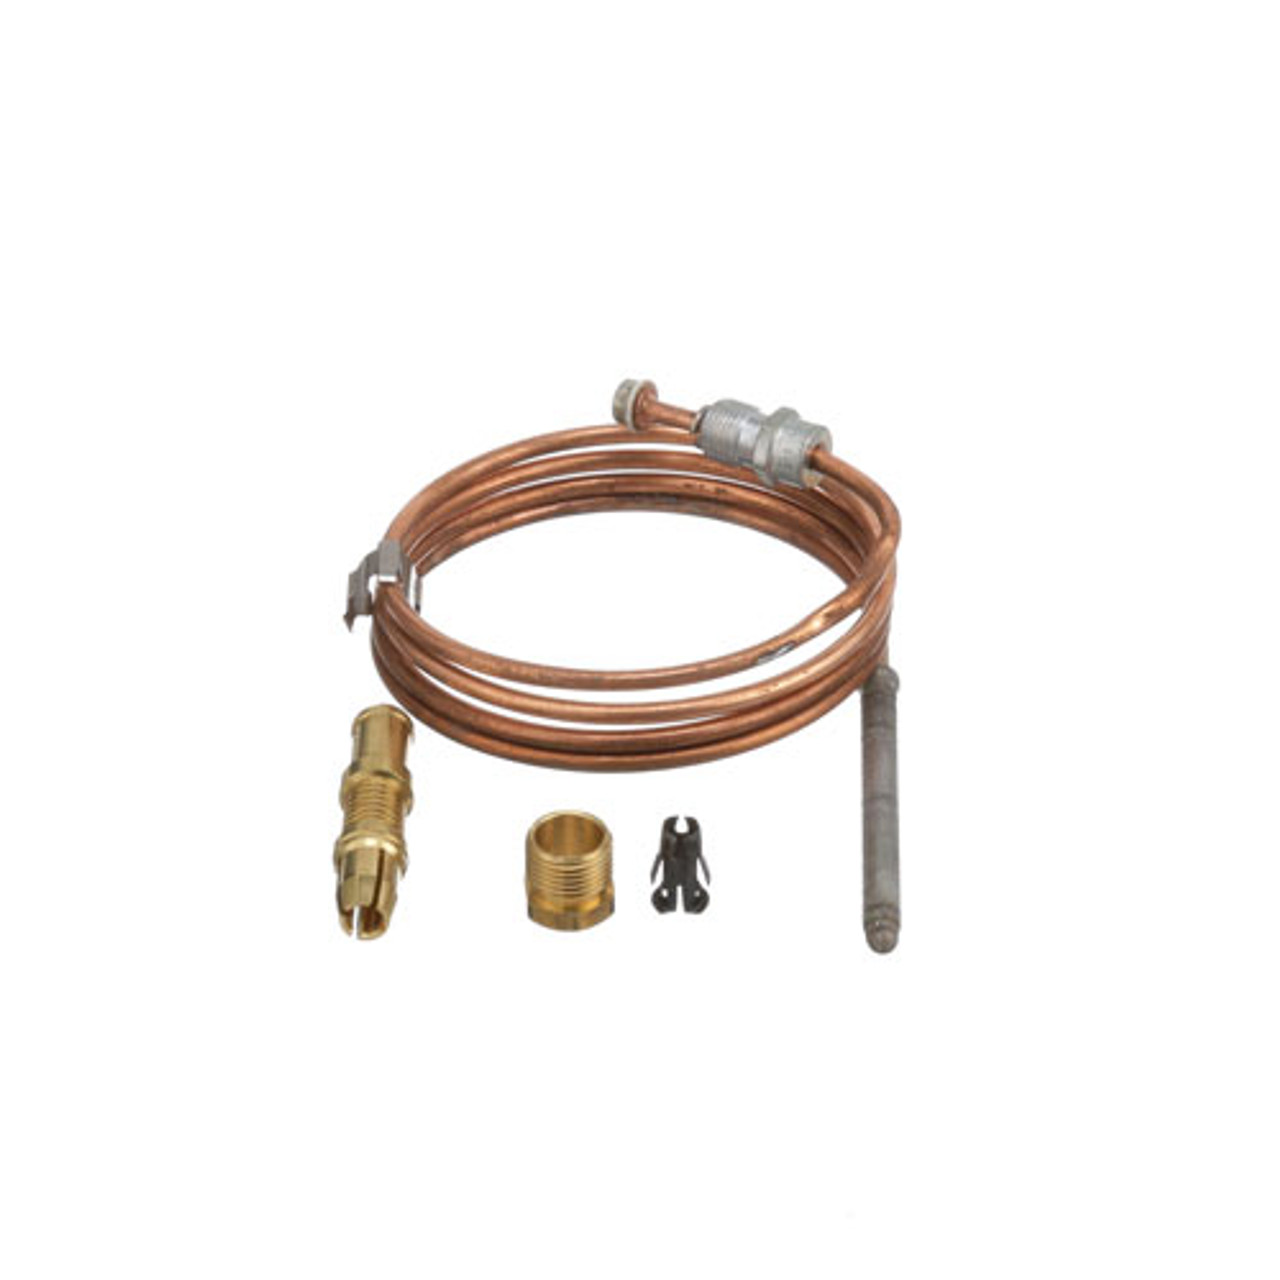 Thermocouple - 36" - Replacement Part For Ember Glo 844214